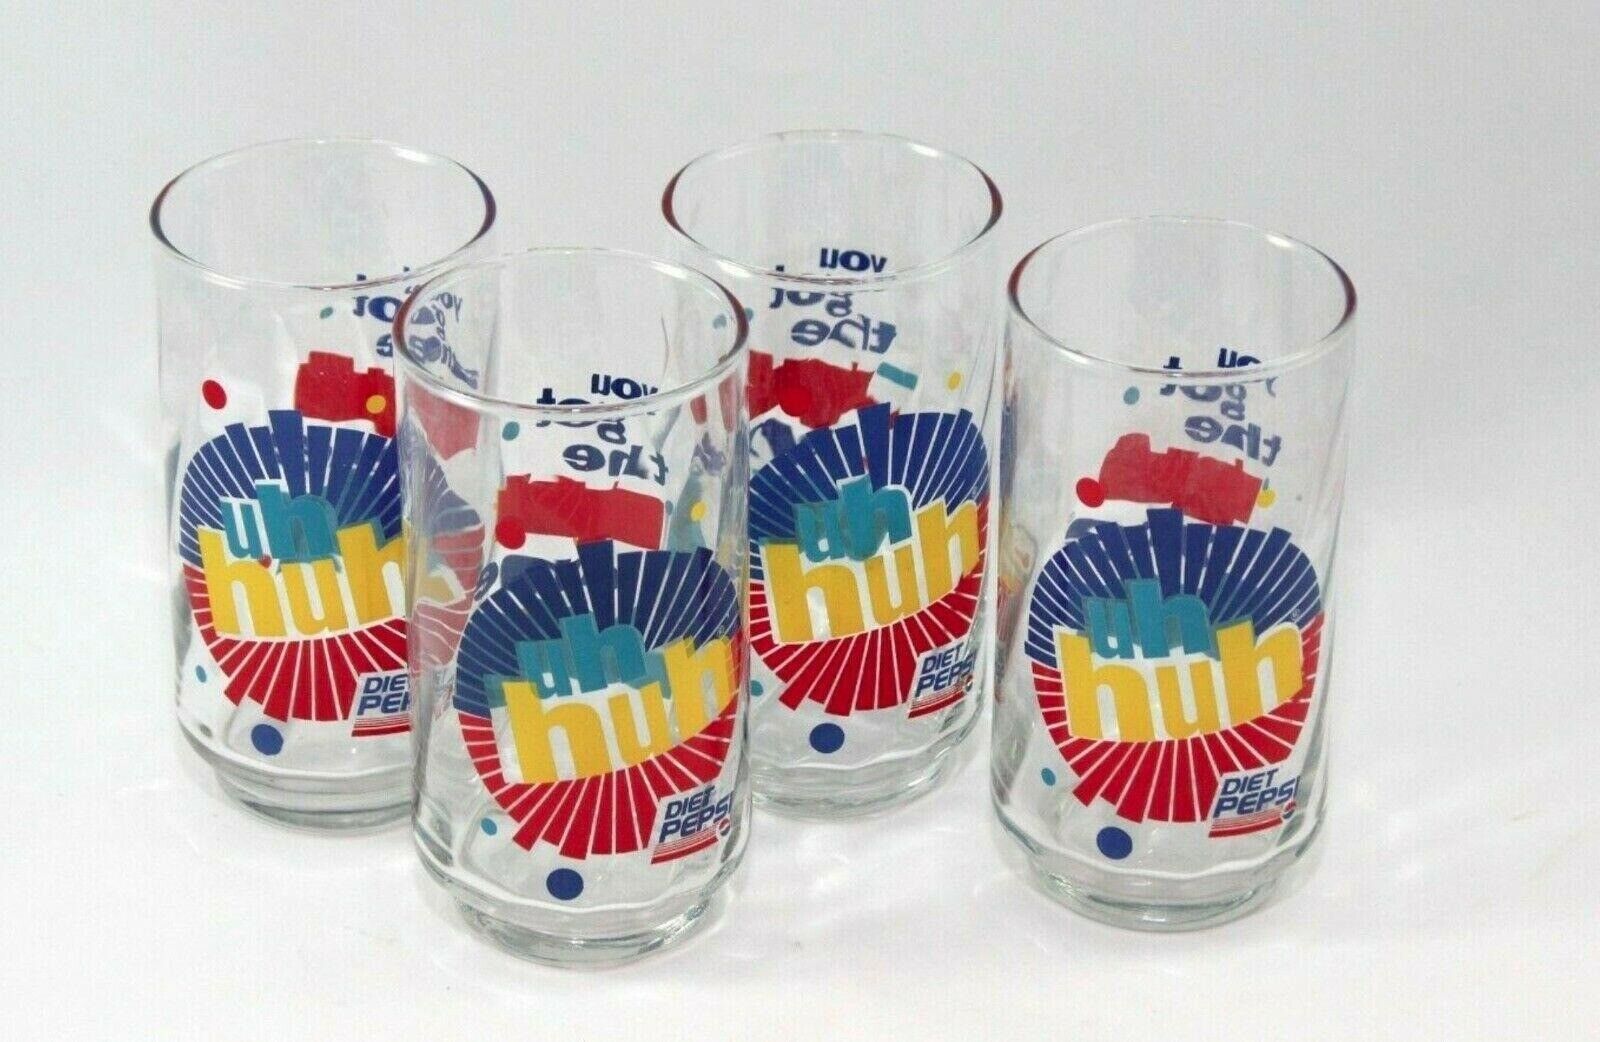 Diet Pepsi Tumblers Uh Huh You Got the Right One Baby Ray Charles Set of 4